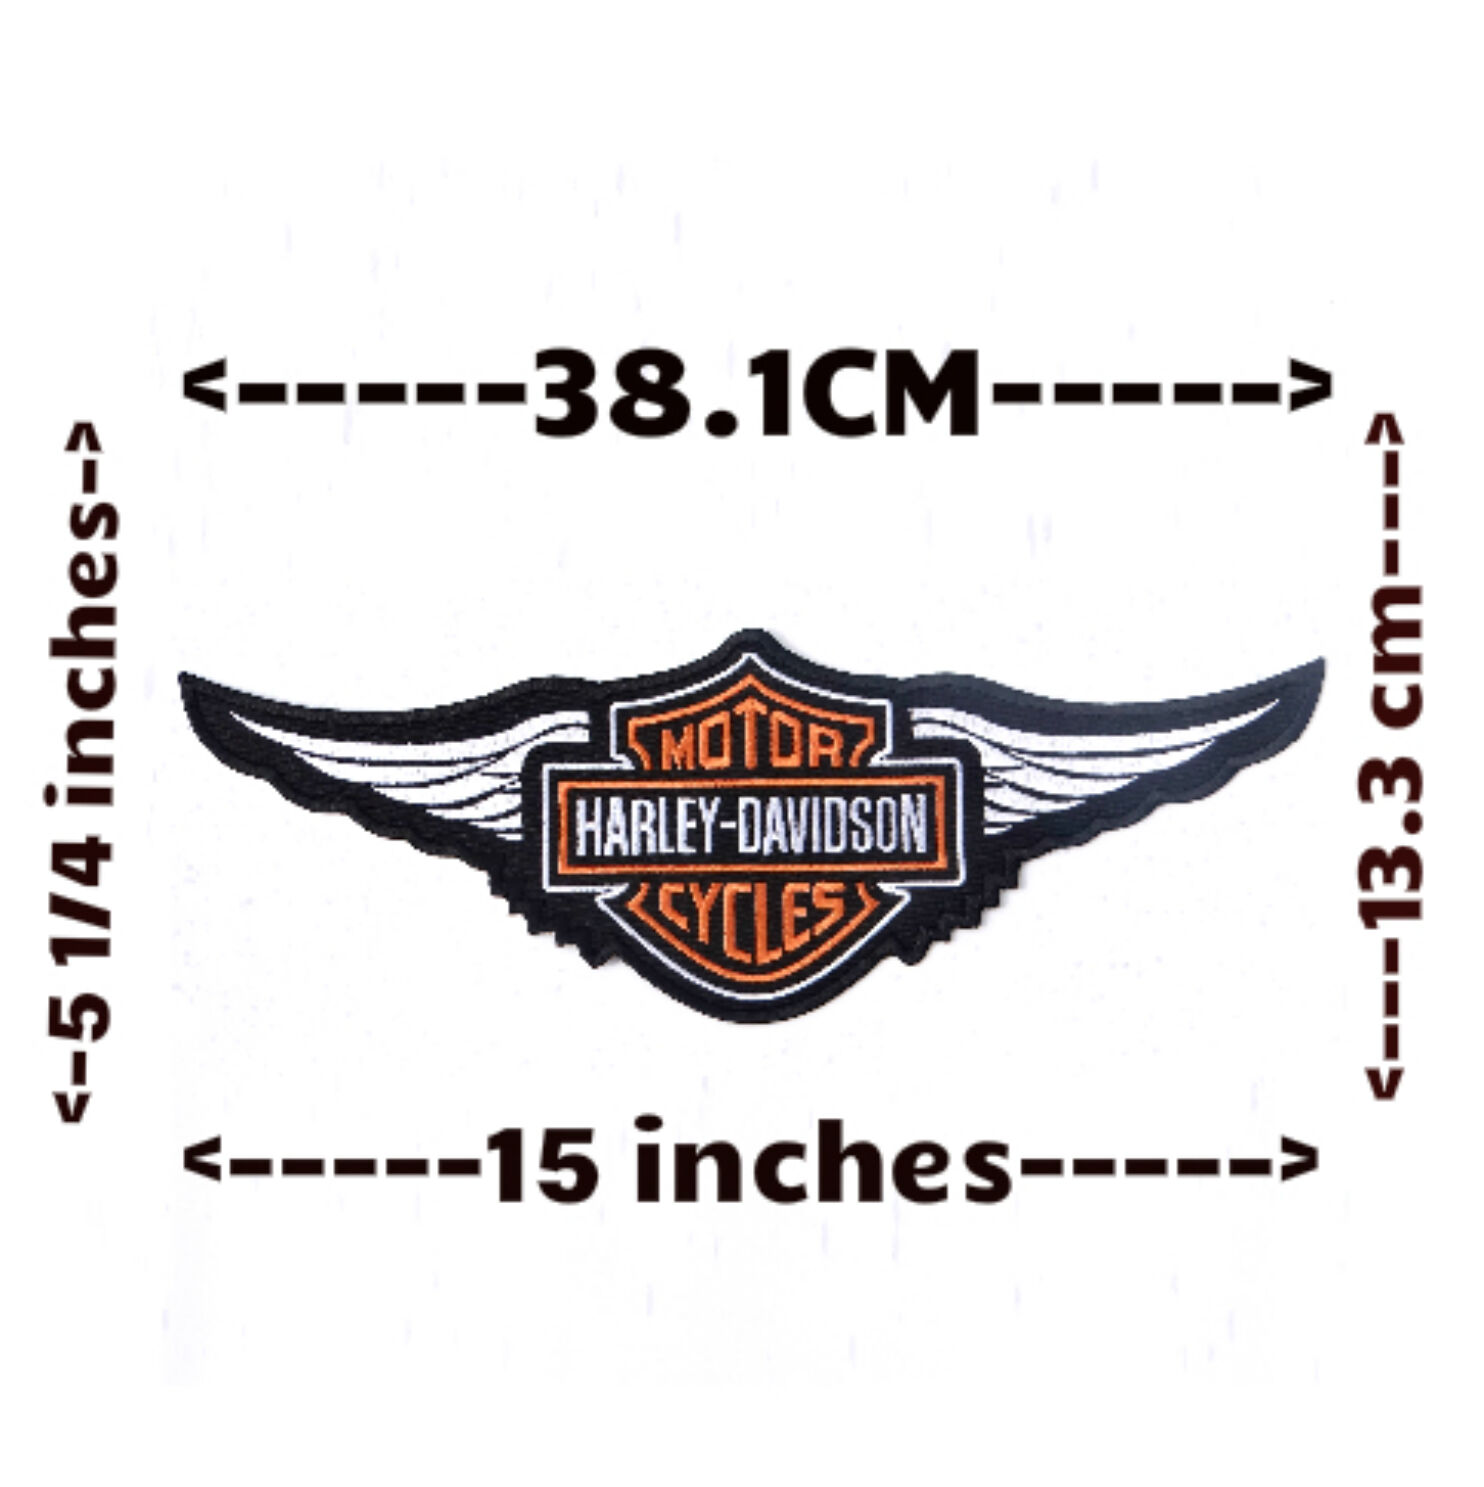 OBSOLETE XL HARLEY DAVIDSON CLASSIC DOWN WING EAGLE BAR AND SHIELD PATCH 